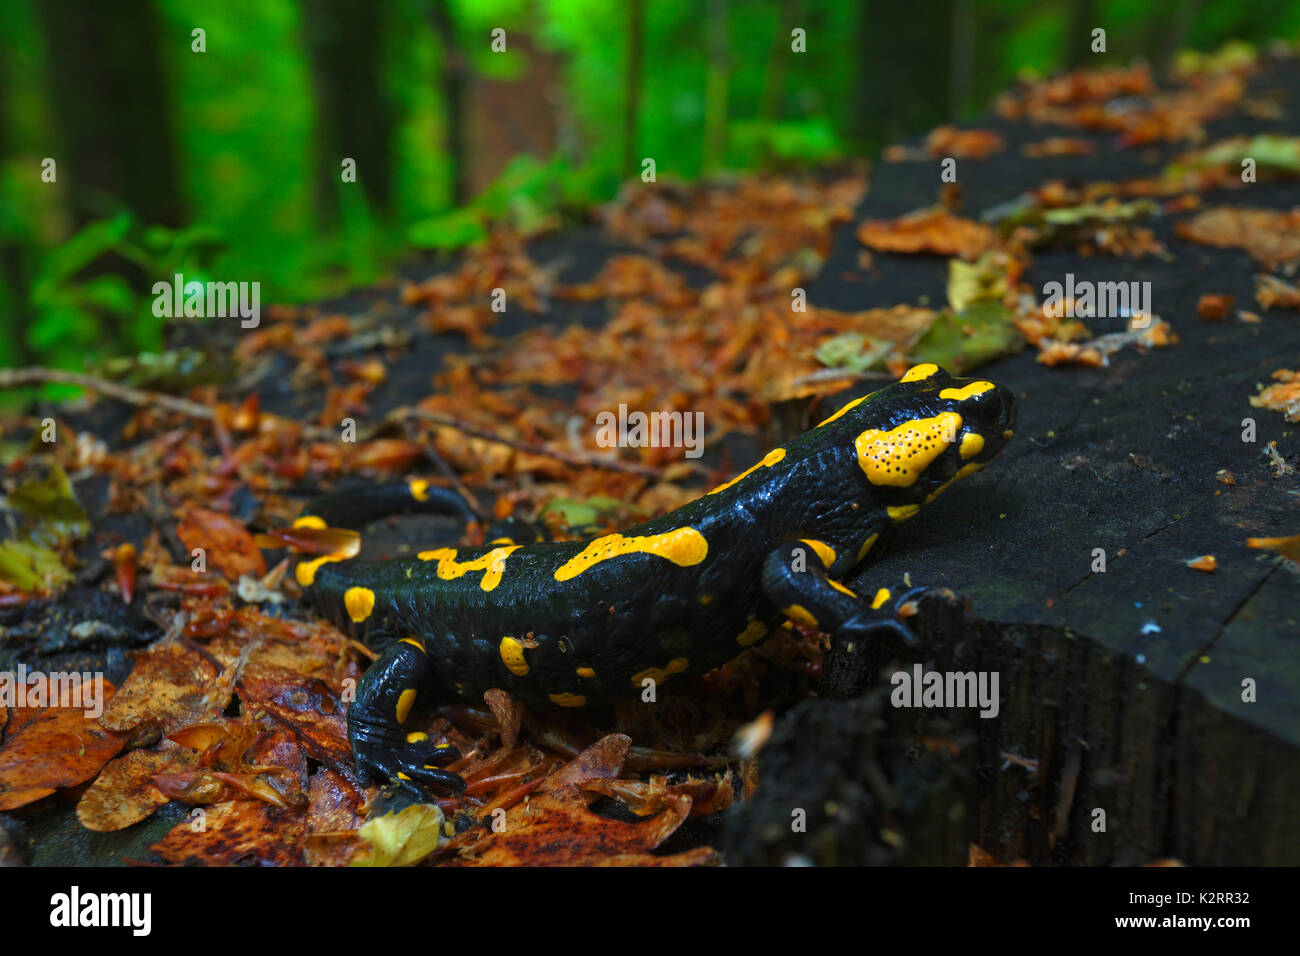 The fire salamander in the wet forest after the rain Stock Photo